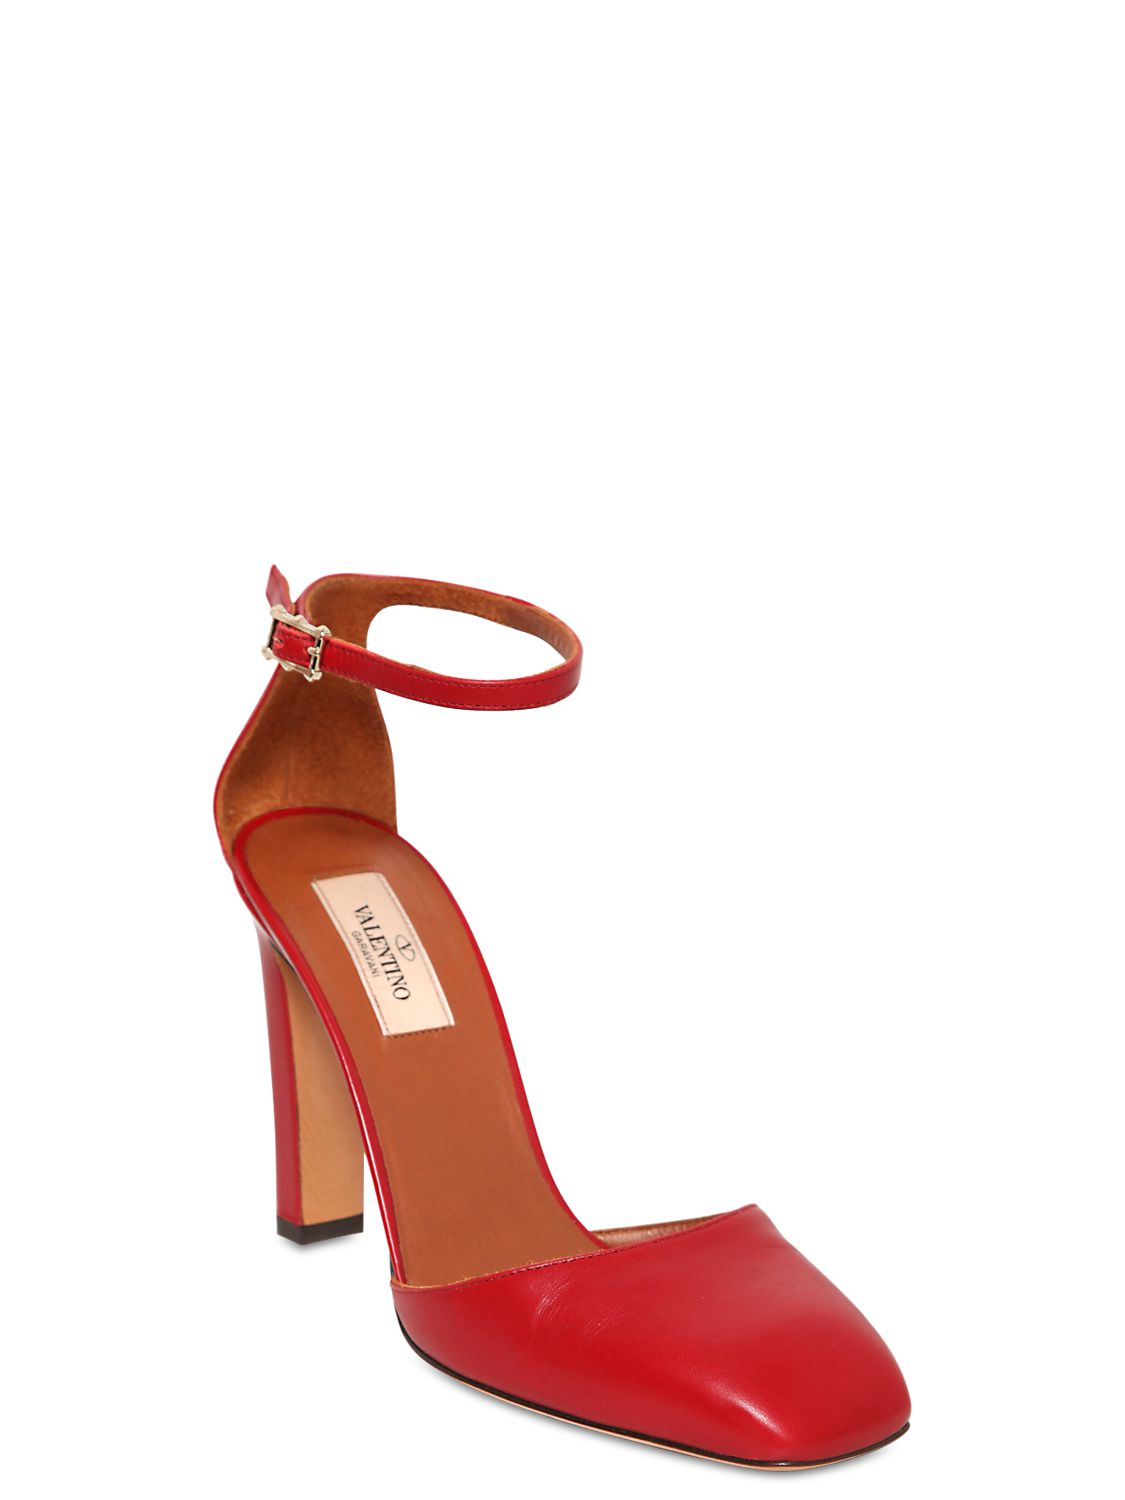 Valentino 100Mm Club On Leather Pumps in Red | Lyst